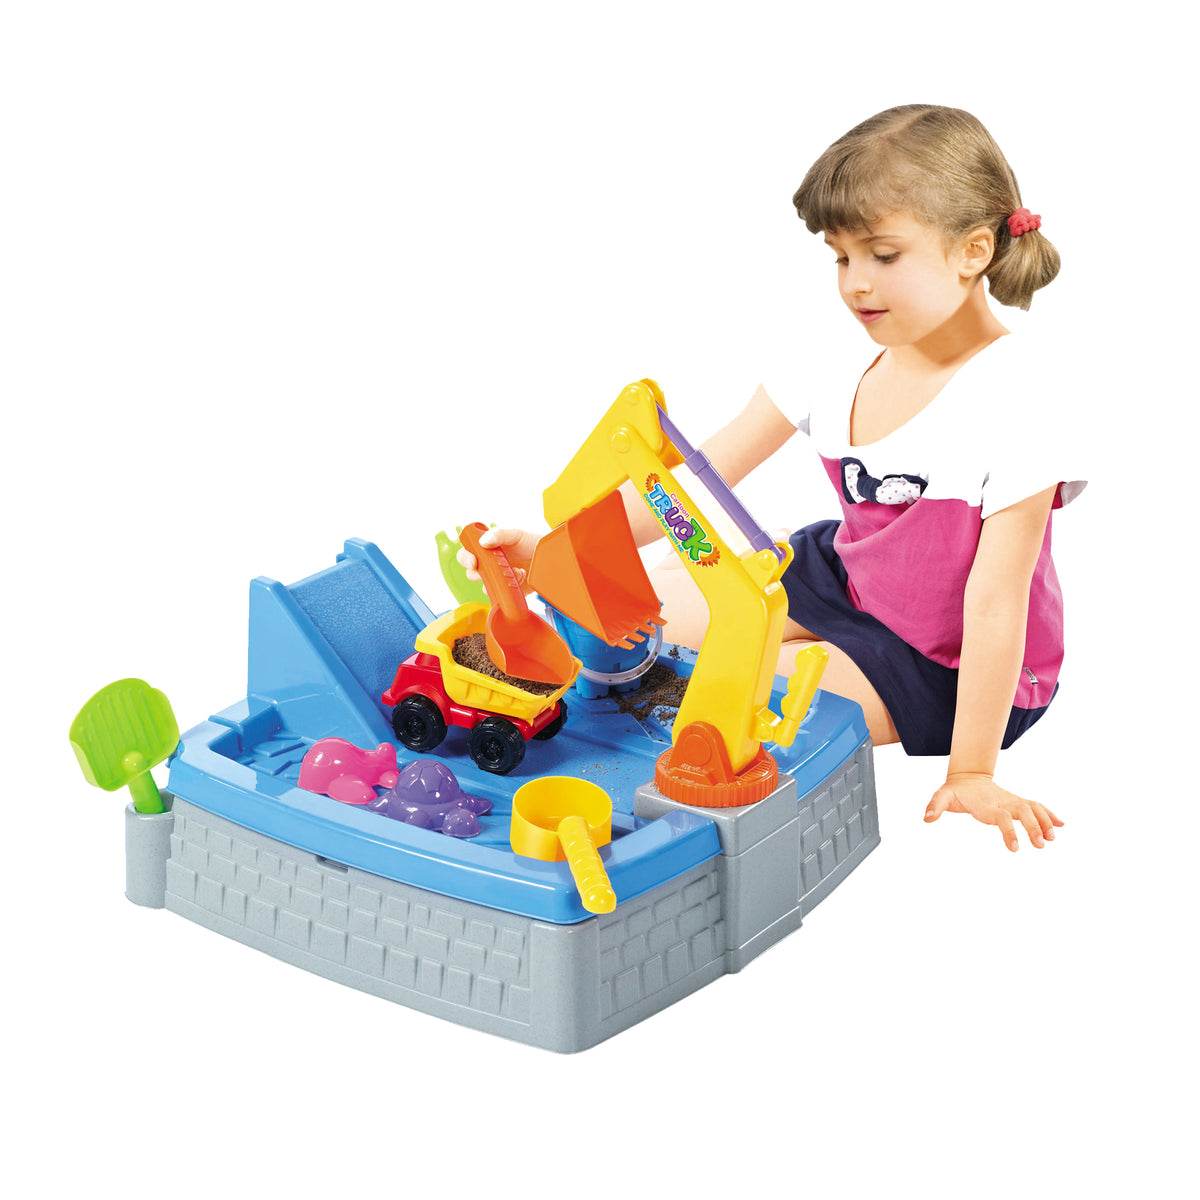 Girl playing with the sandpit box, with the lid closed.